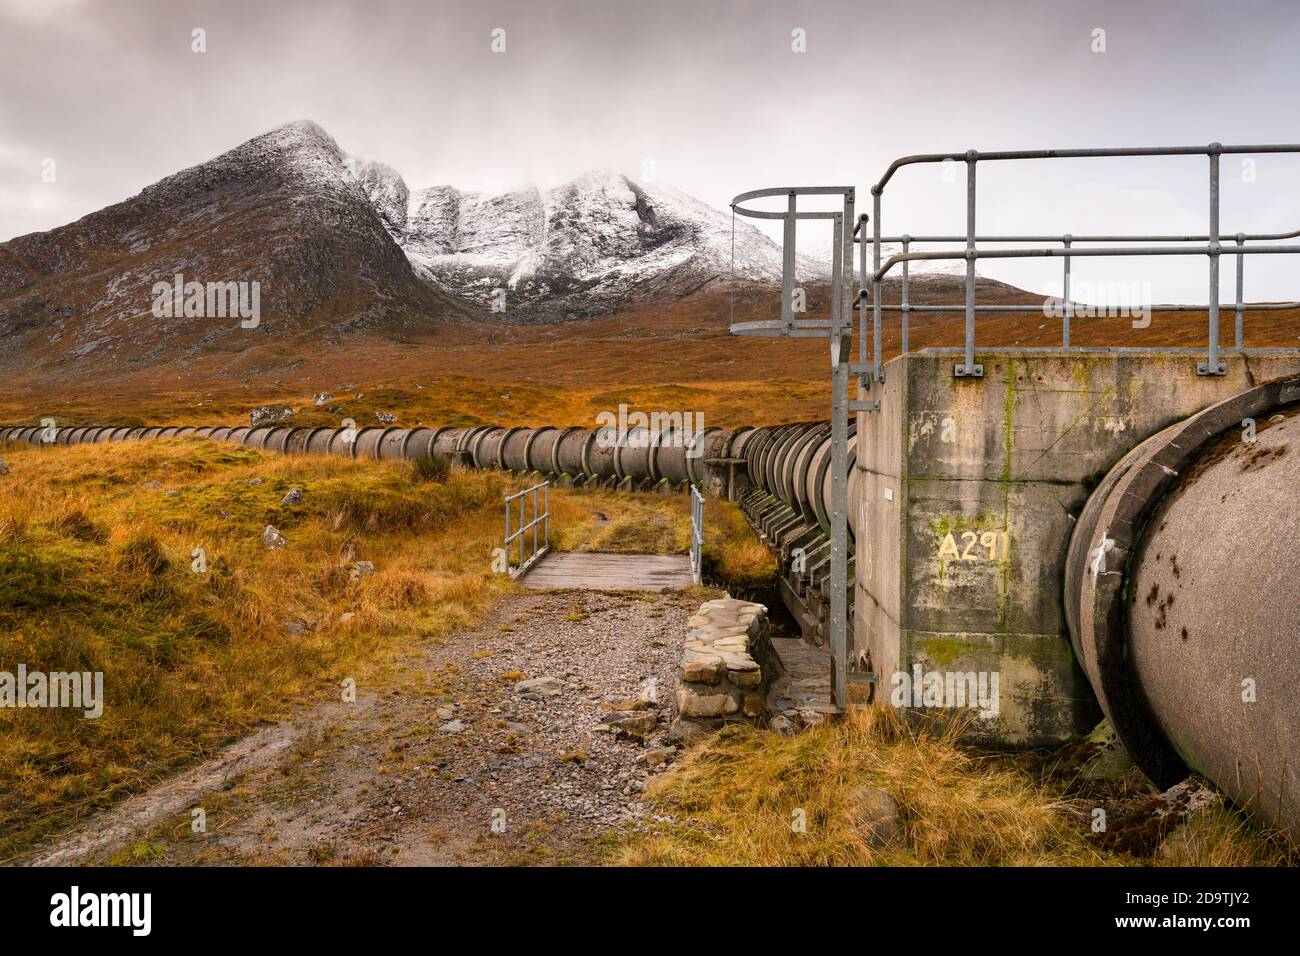 Original concrete pipe / aqueduct taking water into Loch Fannich, Highland Scotland, as part of the hydro-electric scheme in that area. Stock Photo